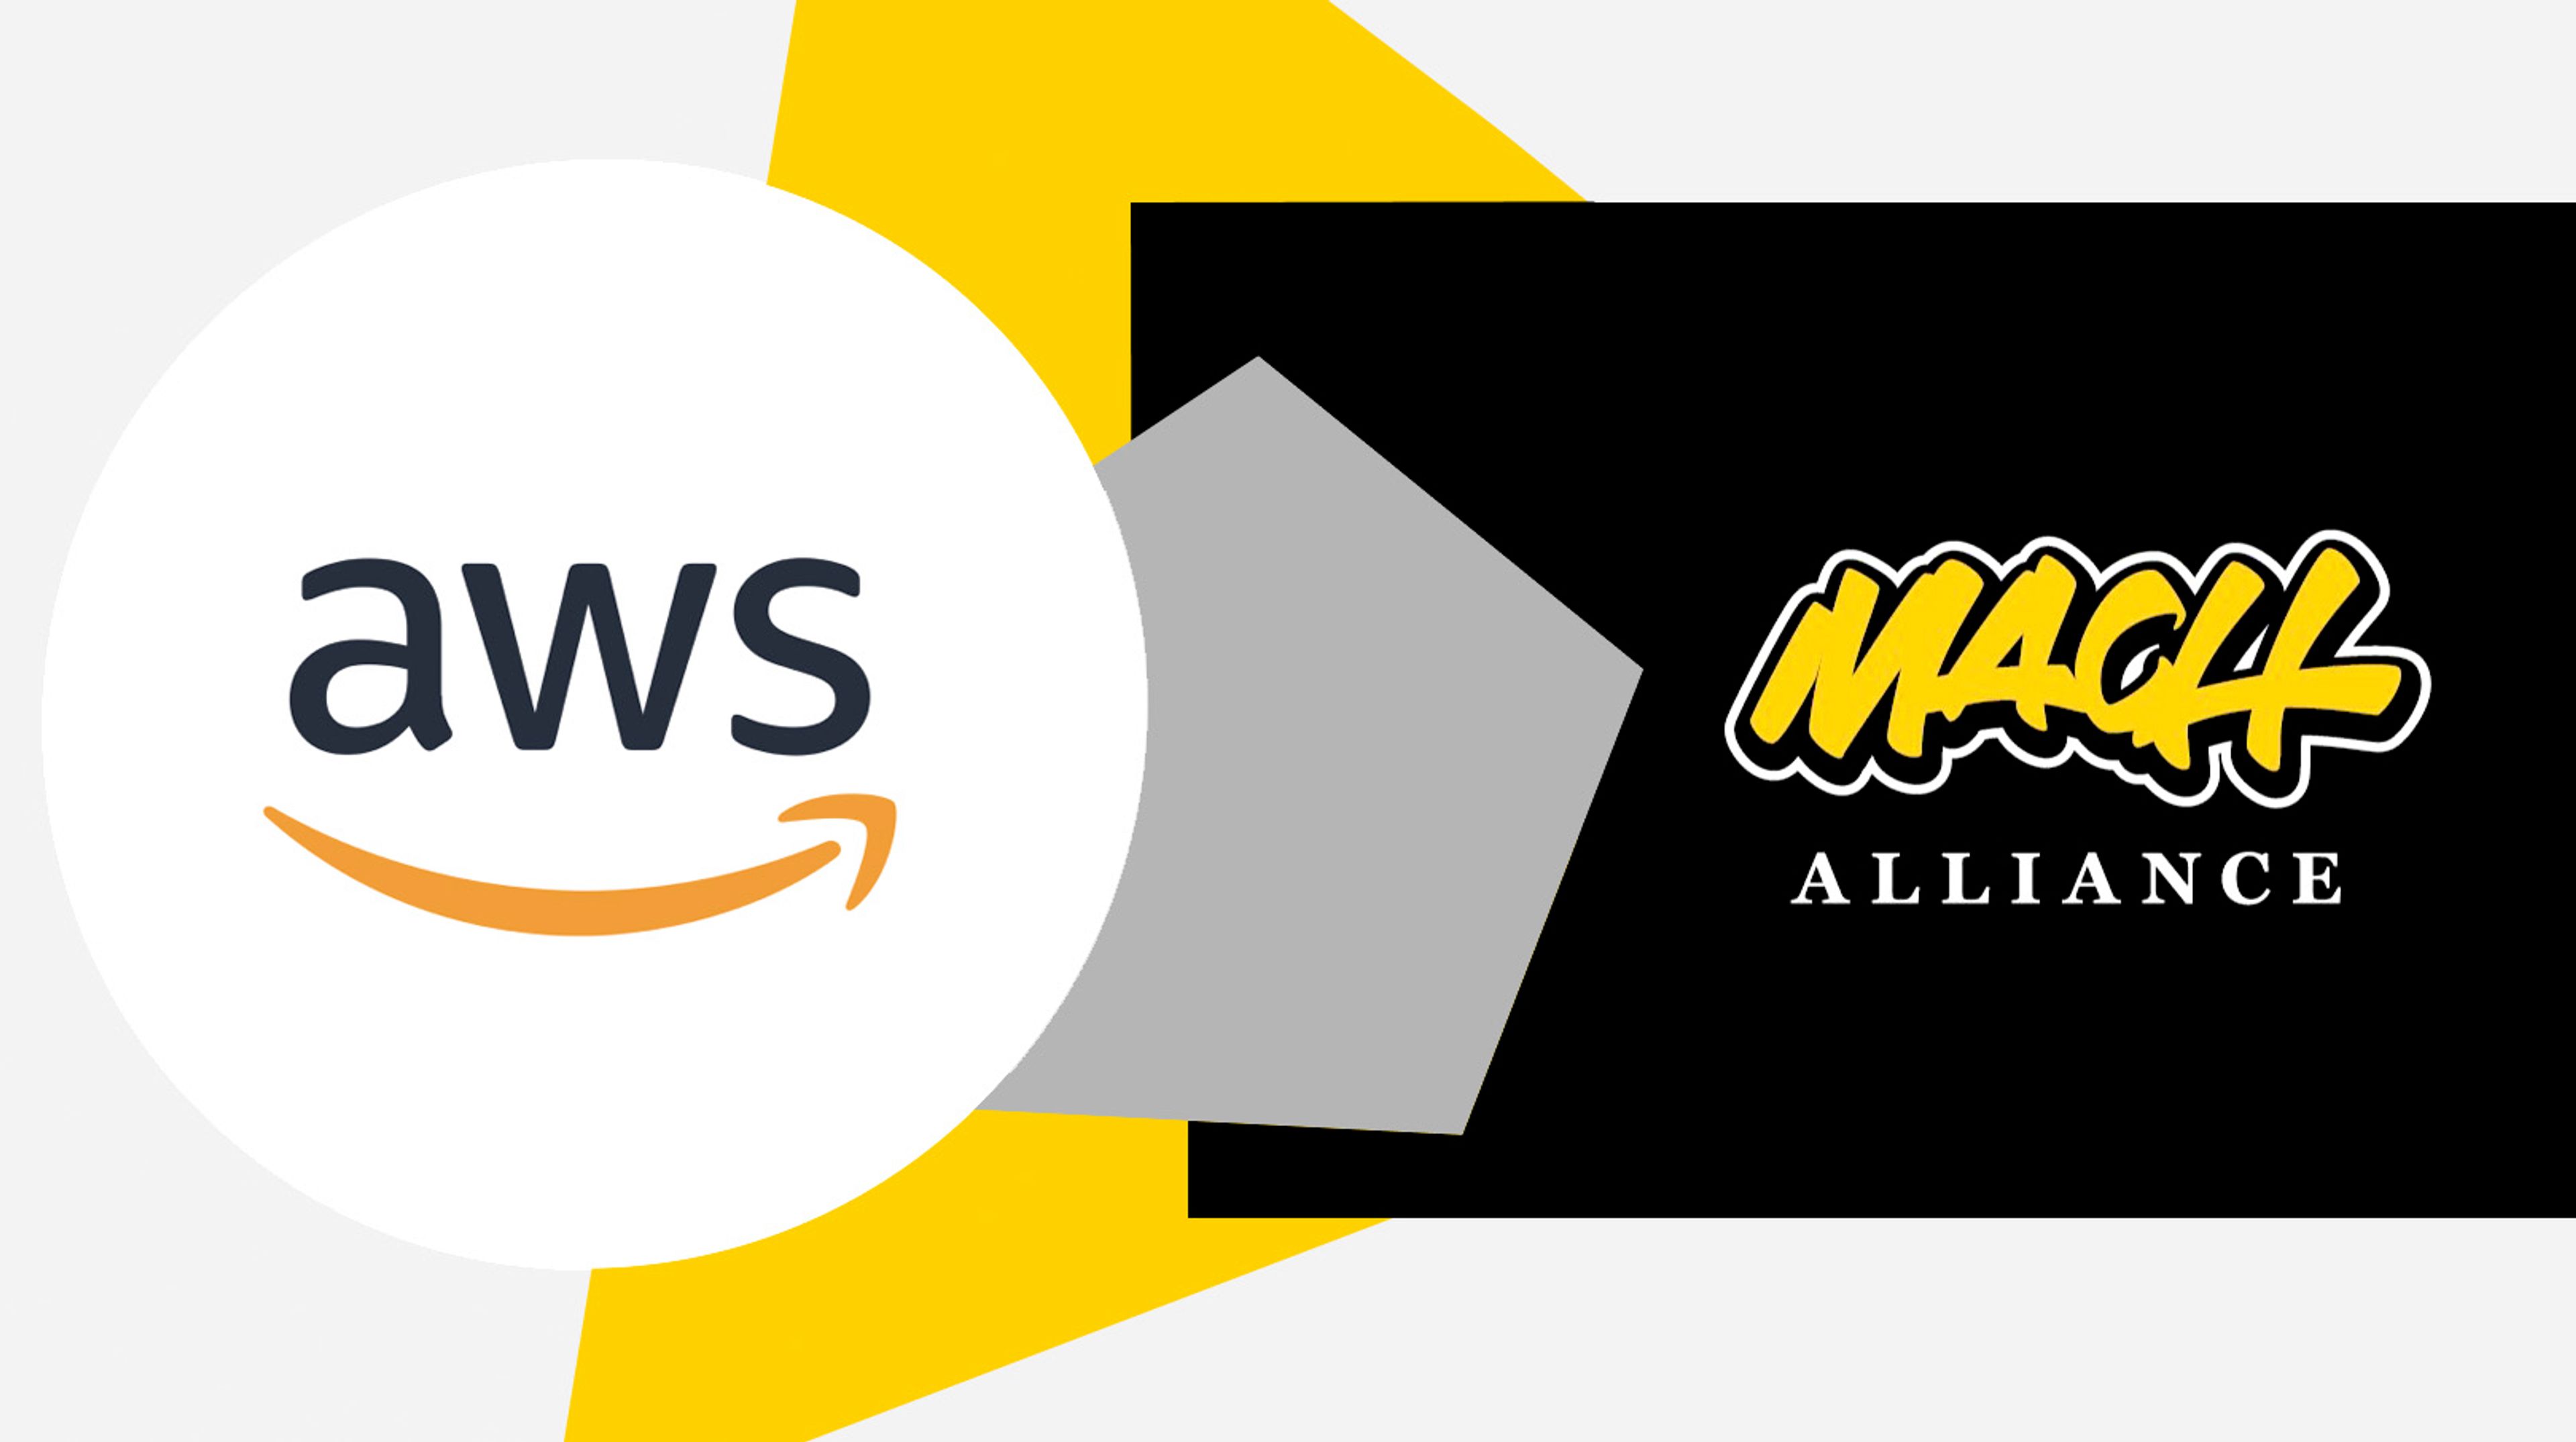 Image of AWS and MACH Alliance logos